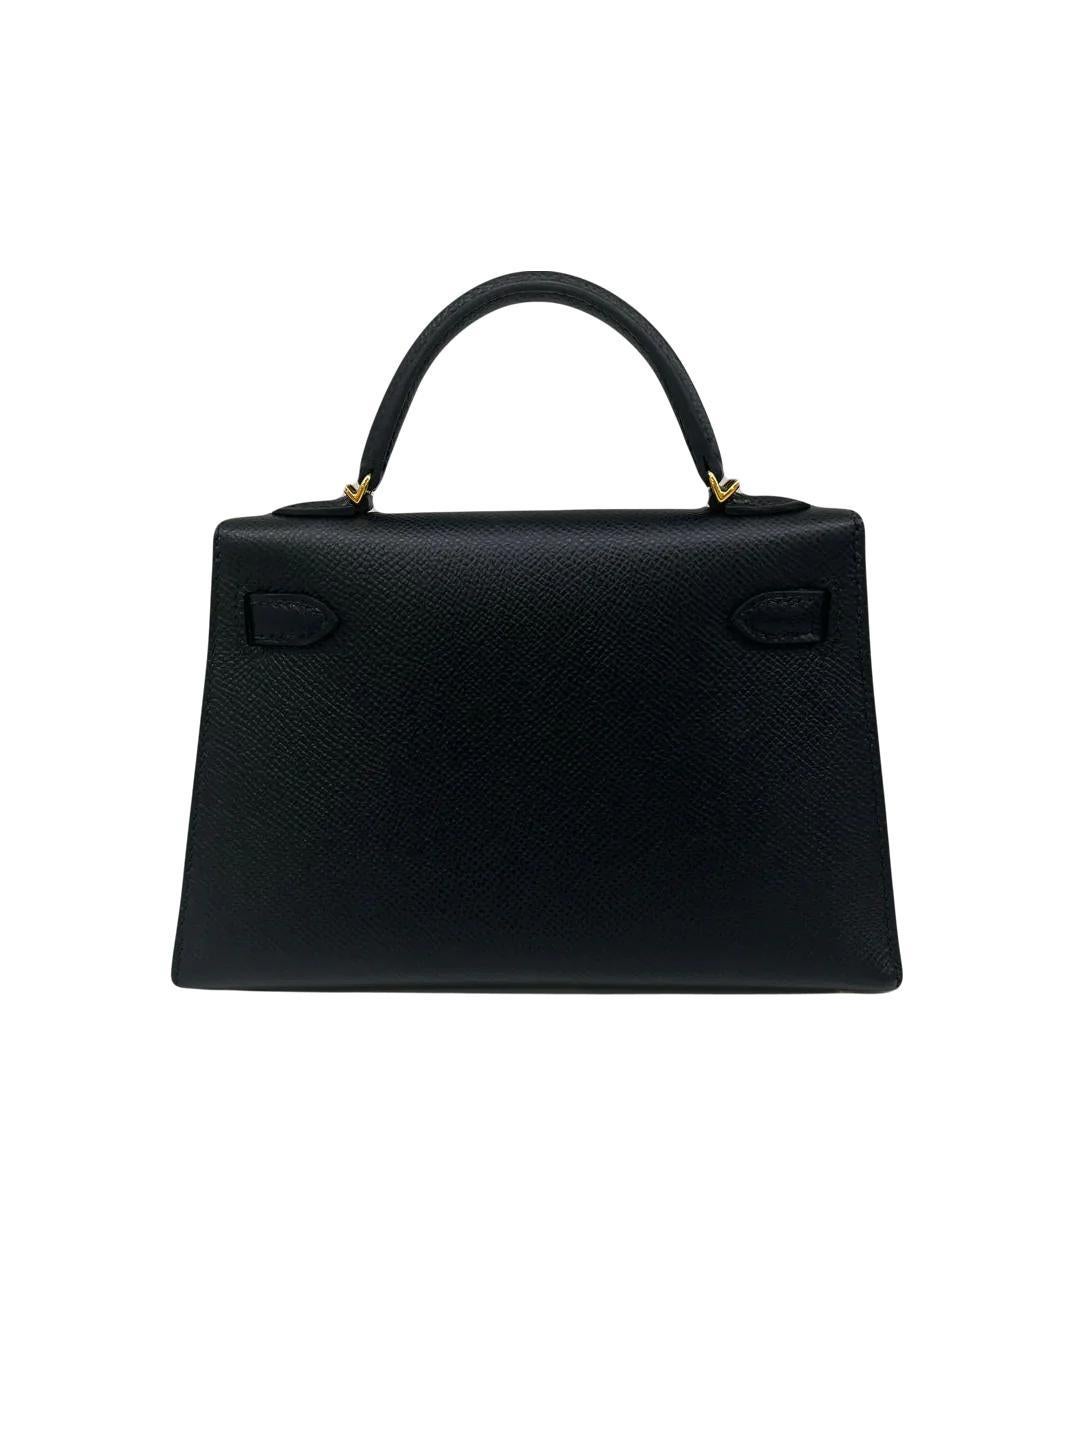 This exclusive piece from the Hermes collection will add an exquisite touch of luxury to your wardrobe. Crafted from premium Epsom Sellier leather and finished with a mini Kelly silhouette, this beautiful black GHW is the perfect sophisticated